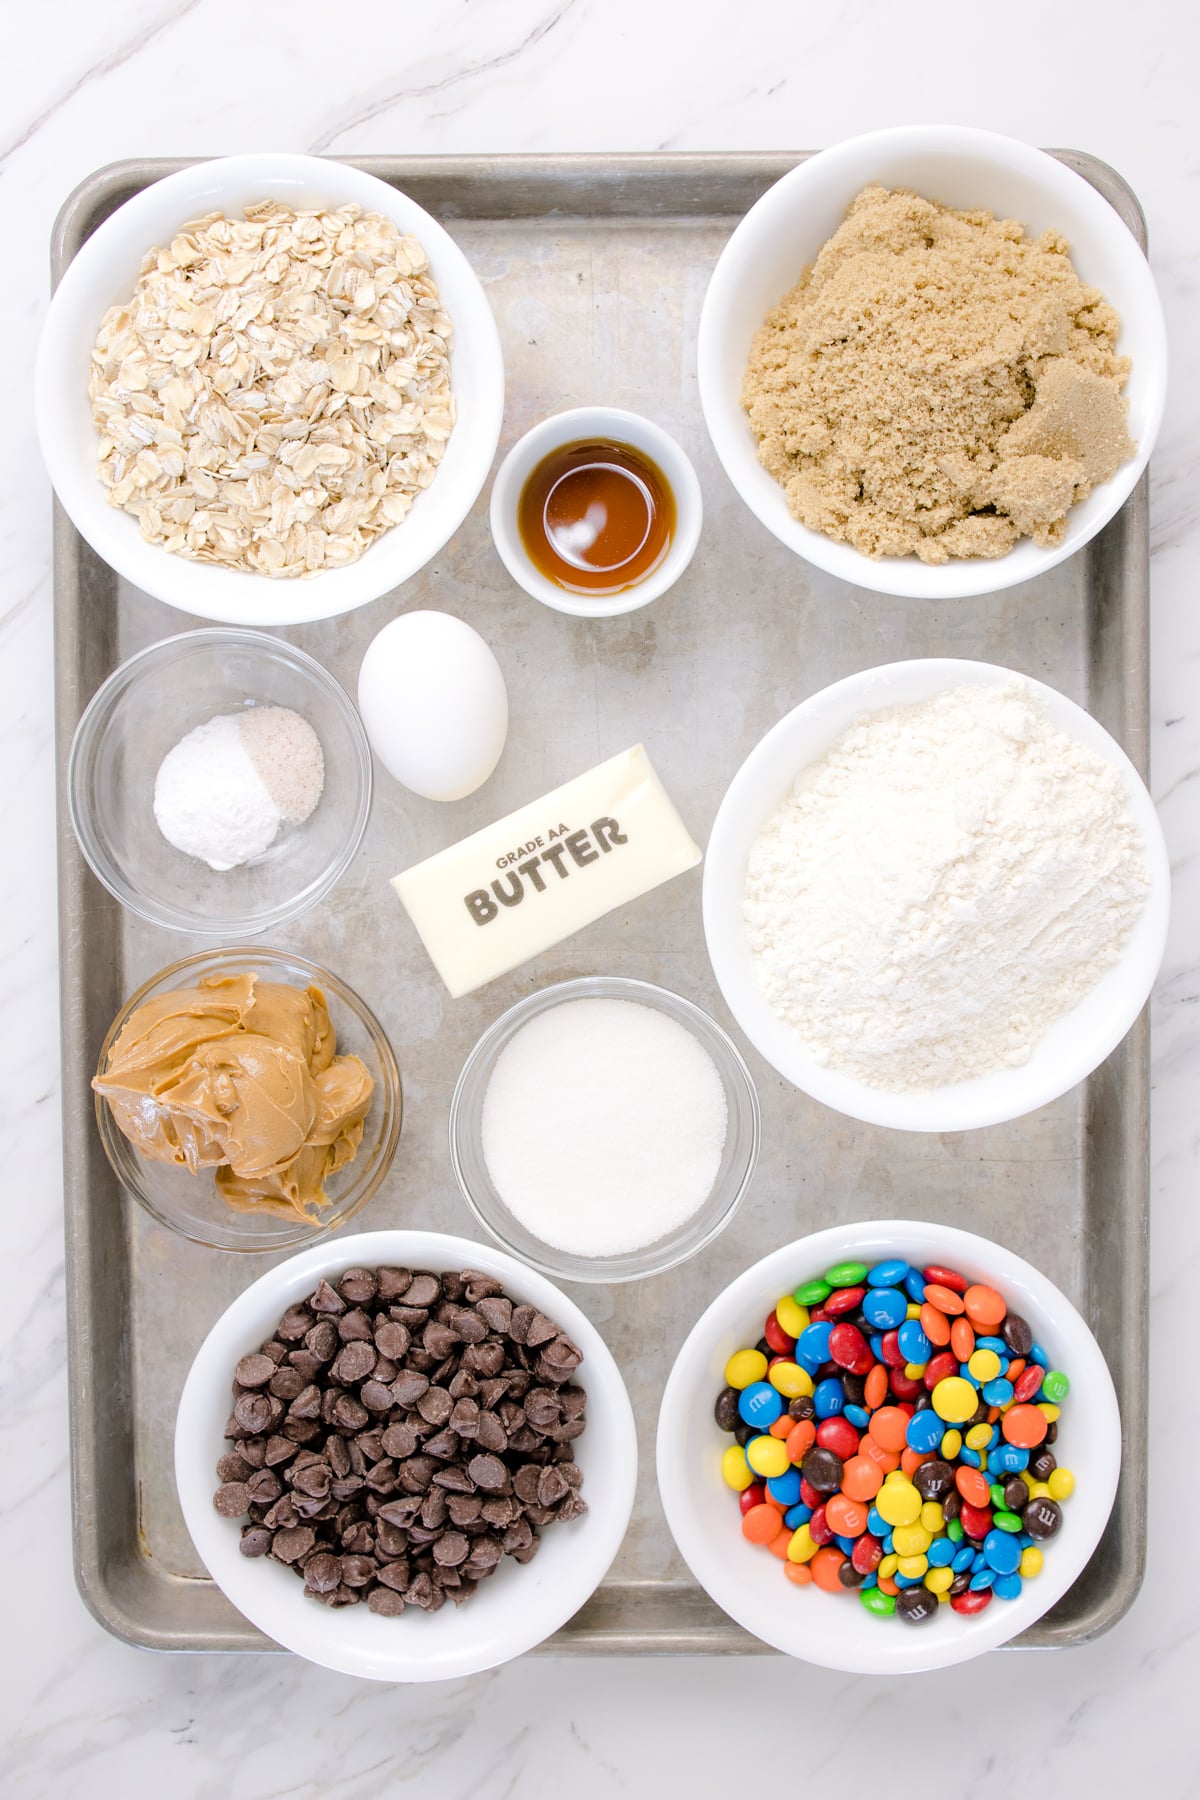 Top view of ingredients needed to mak emonster cookie bars in small boiwls on a baking sheet.